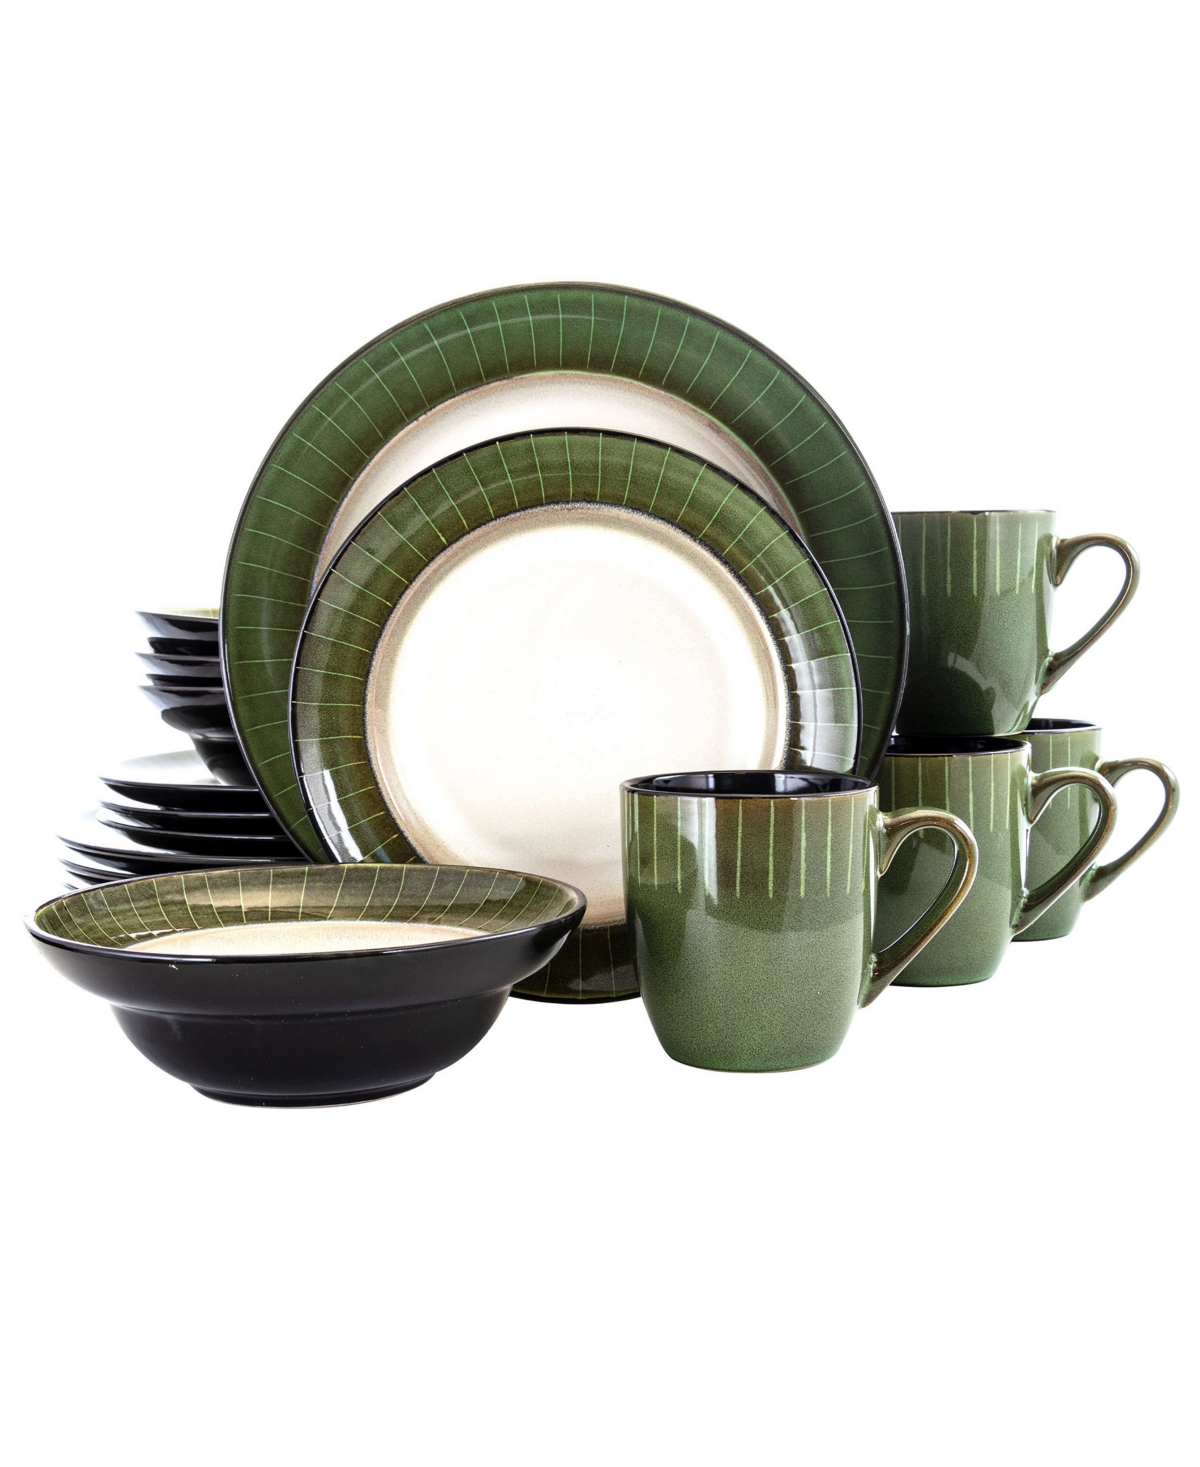 Grand Jade Luxurious Dinnerware with Complete Set of 16 Pieces - Open Green